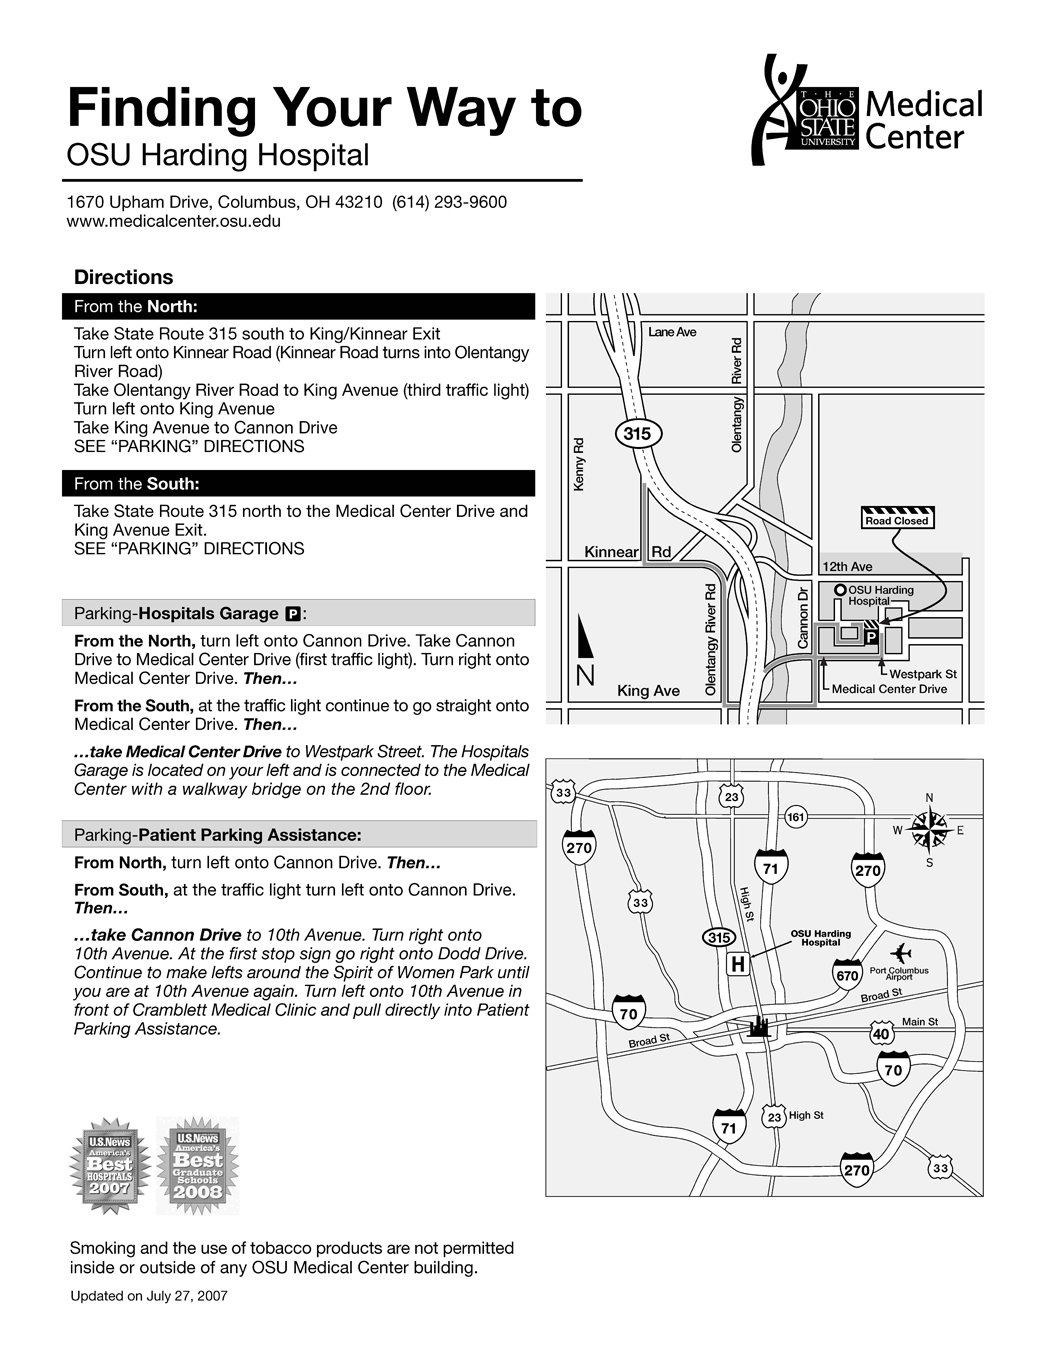 Finding your way to Harding Hospital [digital map] by The Ohio State University Medical Center, July 27, 2007. Copyright 2007 by the Ohio State University Medical Center.